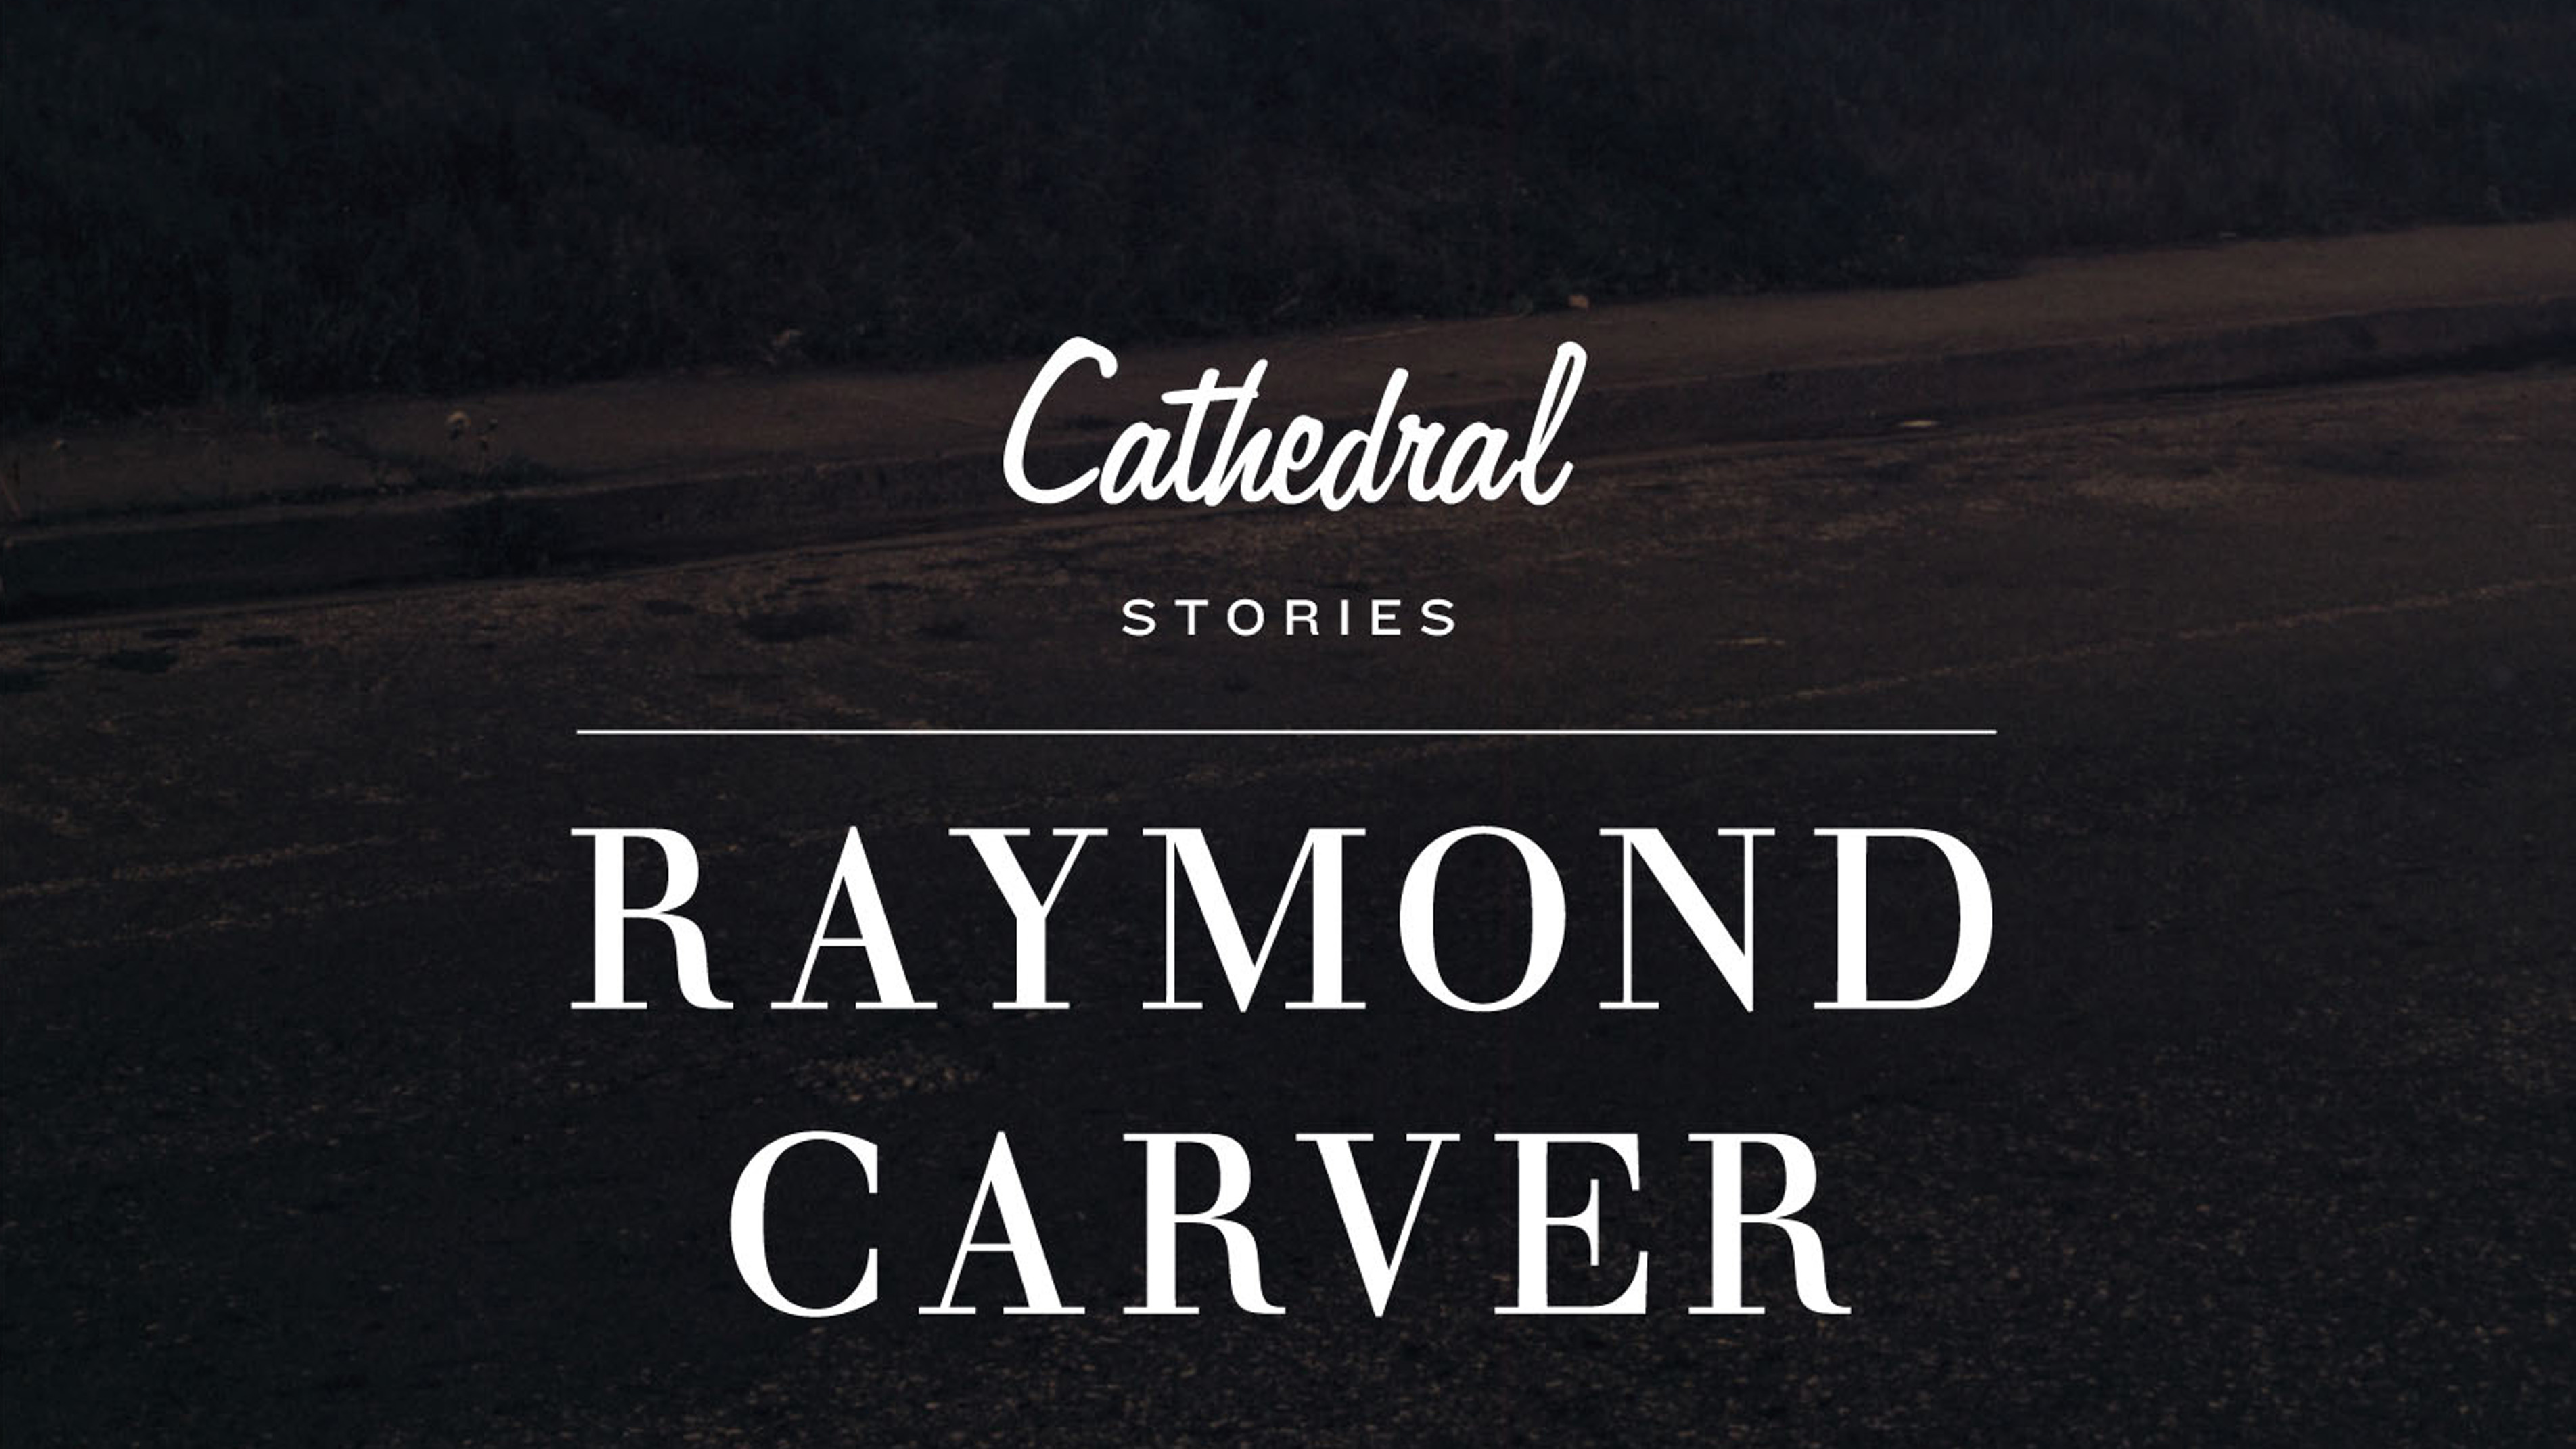 raymond_carver-cathedral